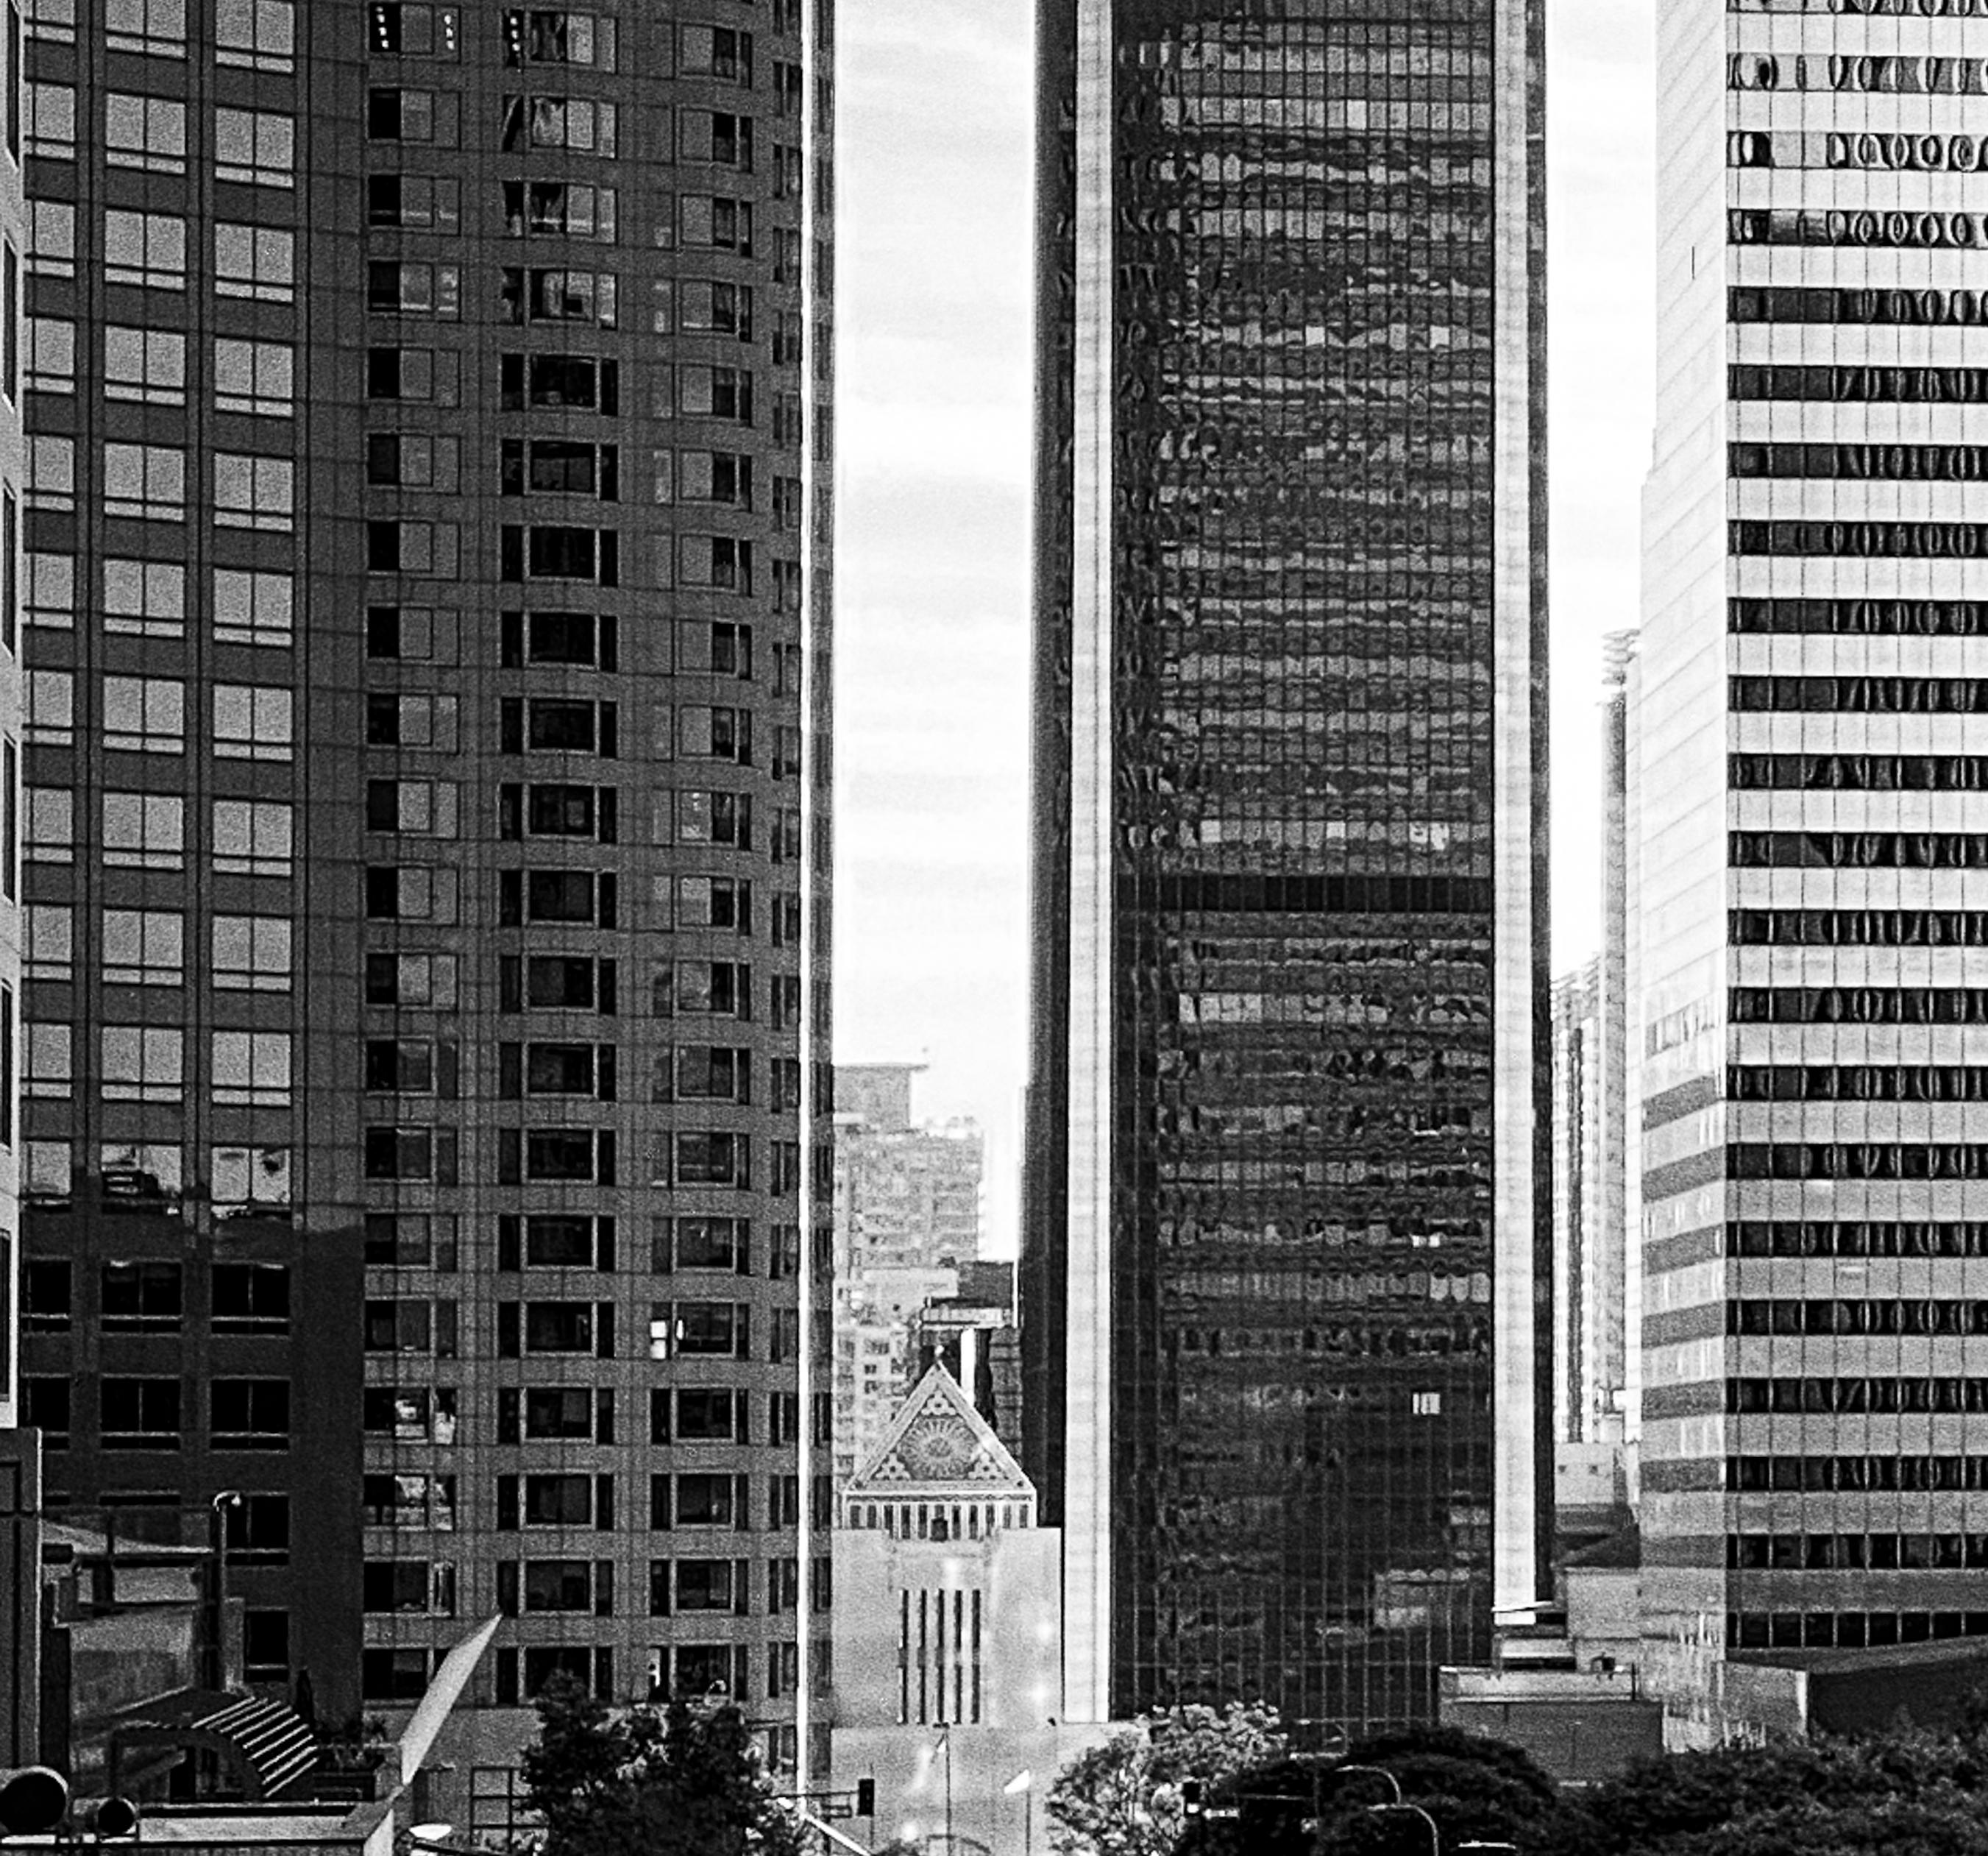 Black and white urban landscape.  The photograph is taken in Downtown, Los Angeles.

Original gallery quality archival pigment print on archival paper signed by the artist.
Limited edition of 6
Paper size: 18